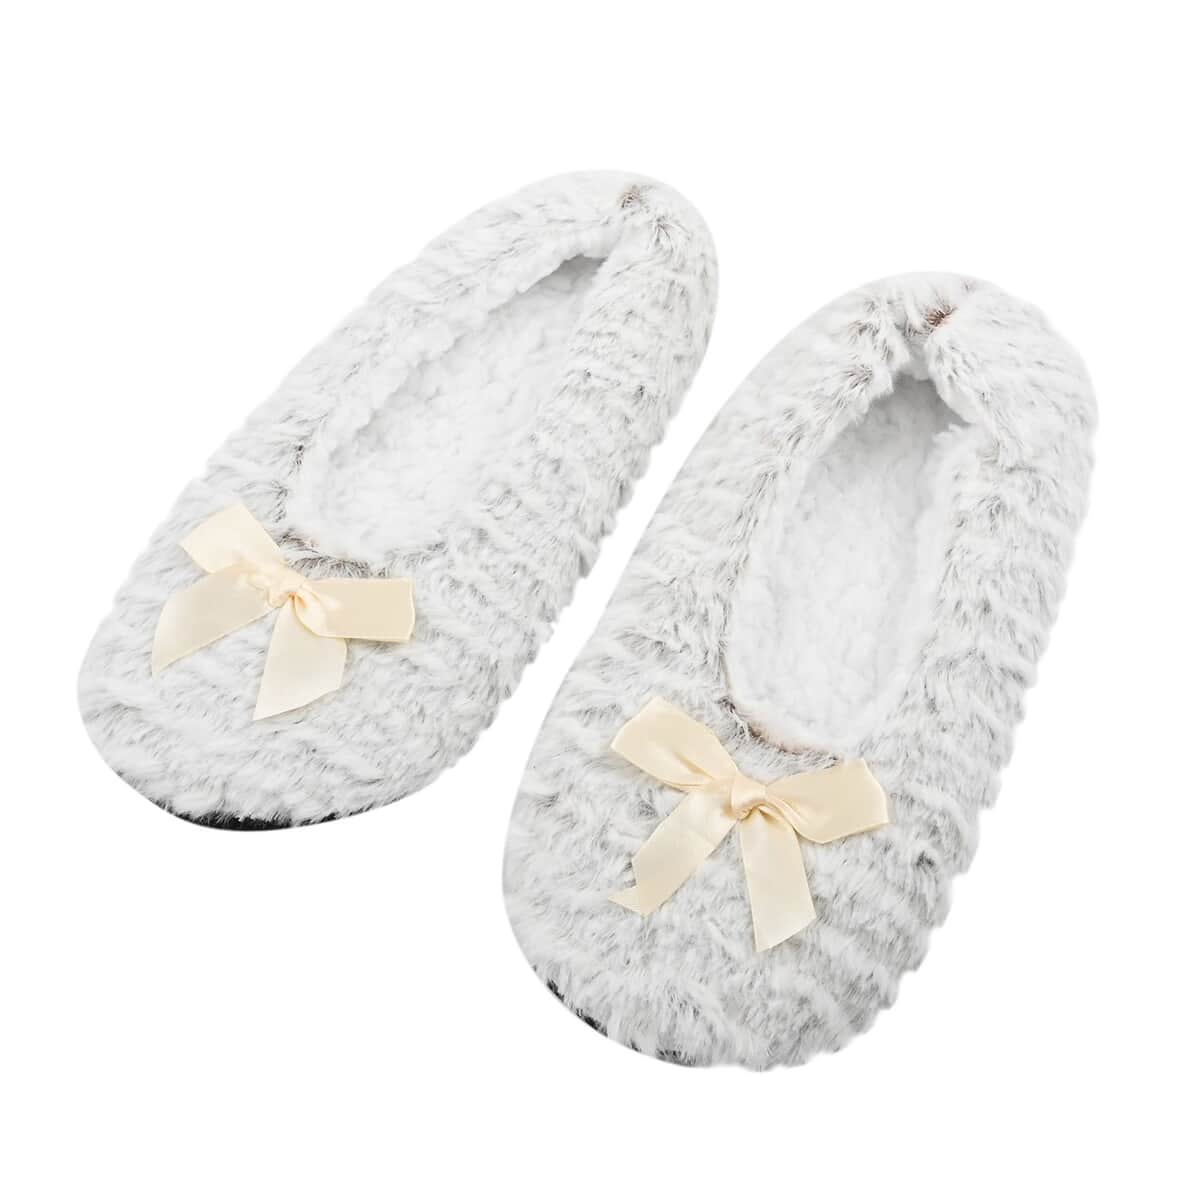 HOMESMART Light Gray Microfiber Faux Fur, Sherpa Booties and Matching Ballerina Slippers (Women's Size 5-10) image number 2